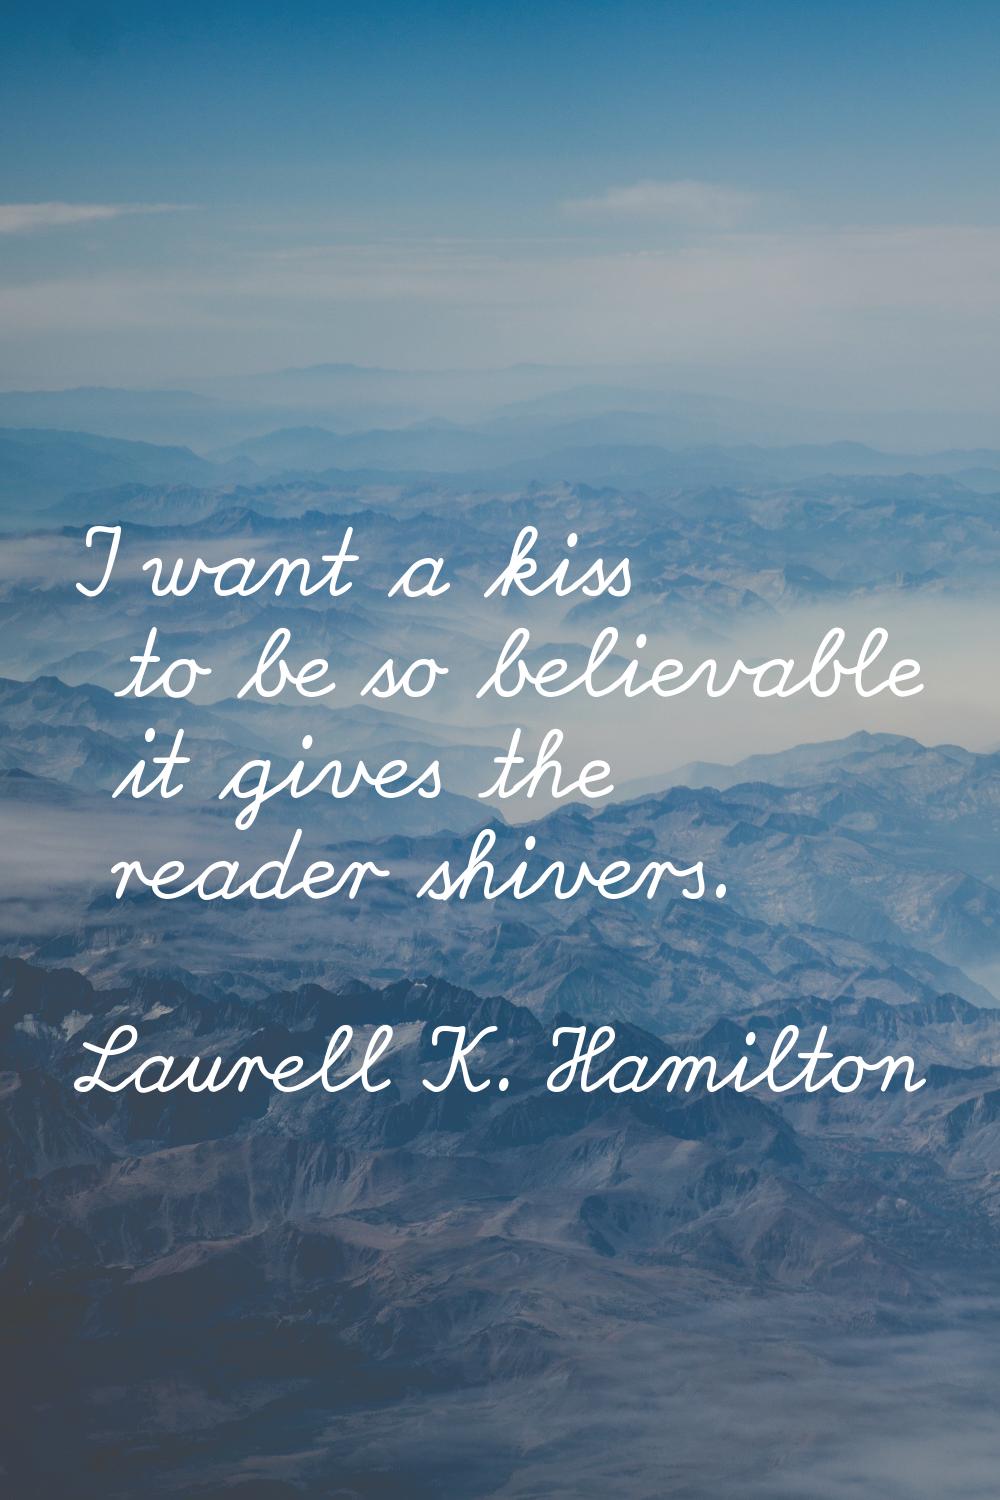 I want a kiss to be so believable it gives the reader shivers.